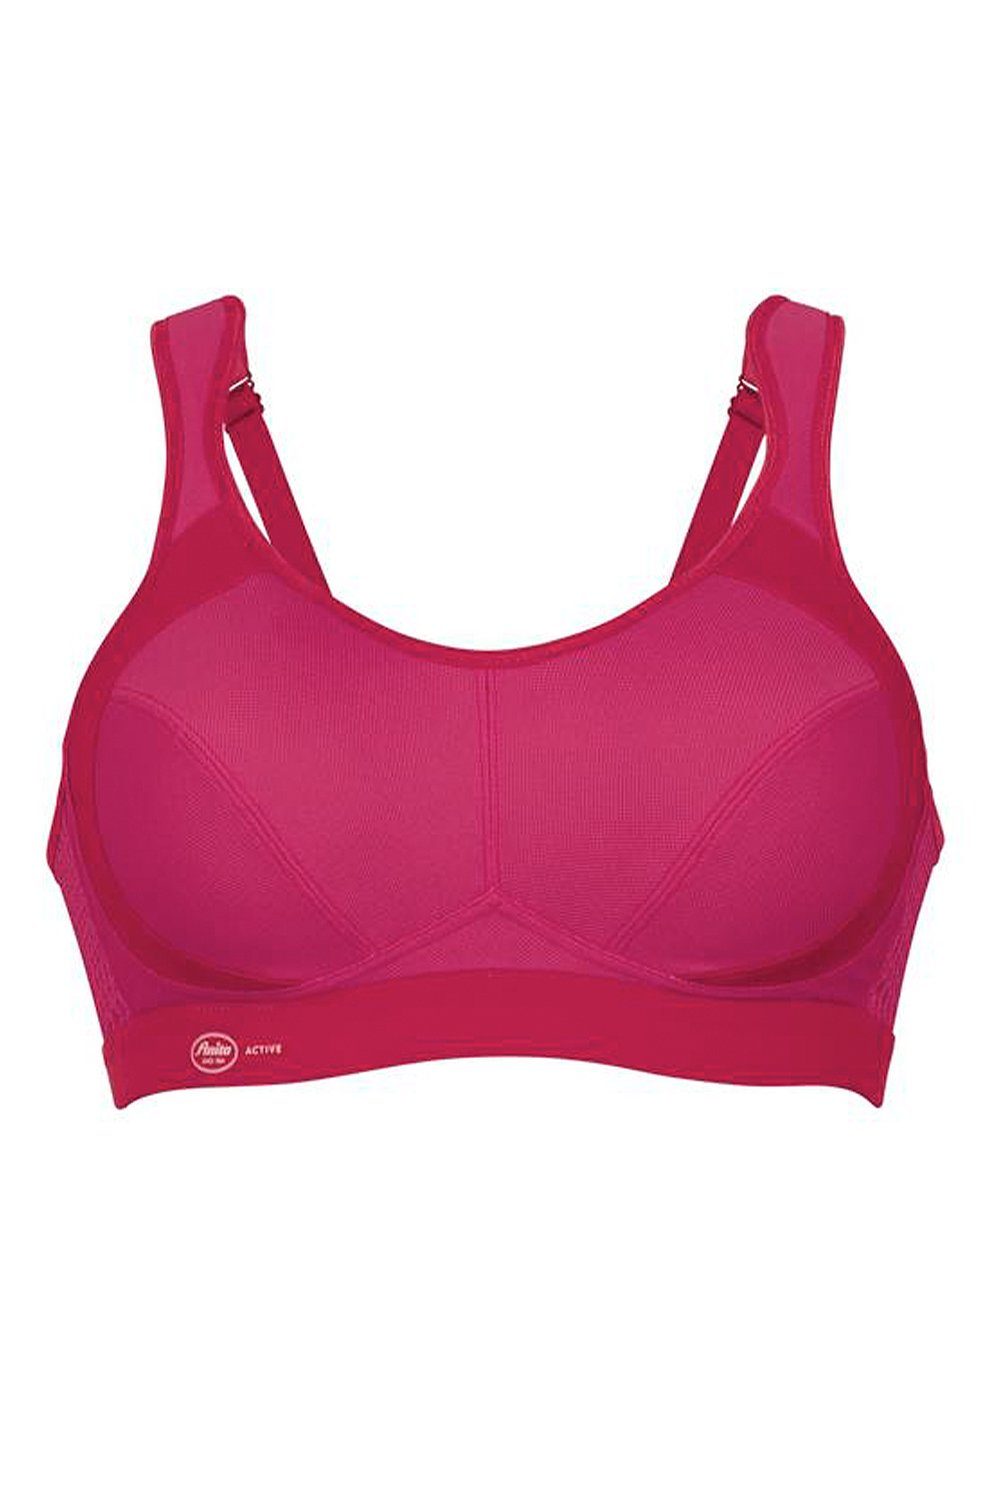 Anita - support maximum Active Sport-BH red control extreme Sport-BH, 5527 candy